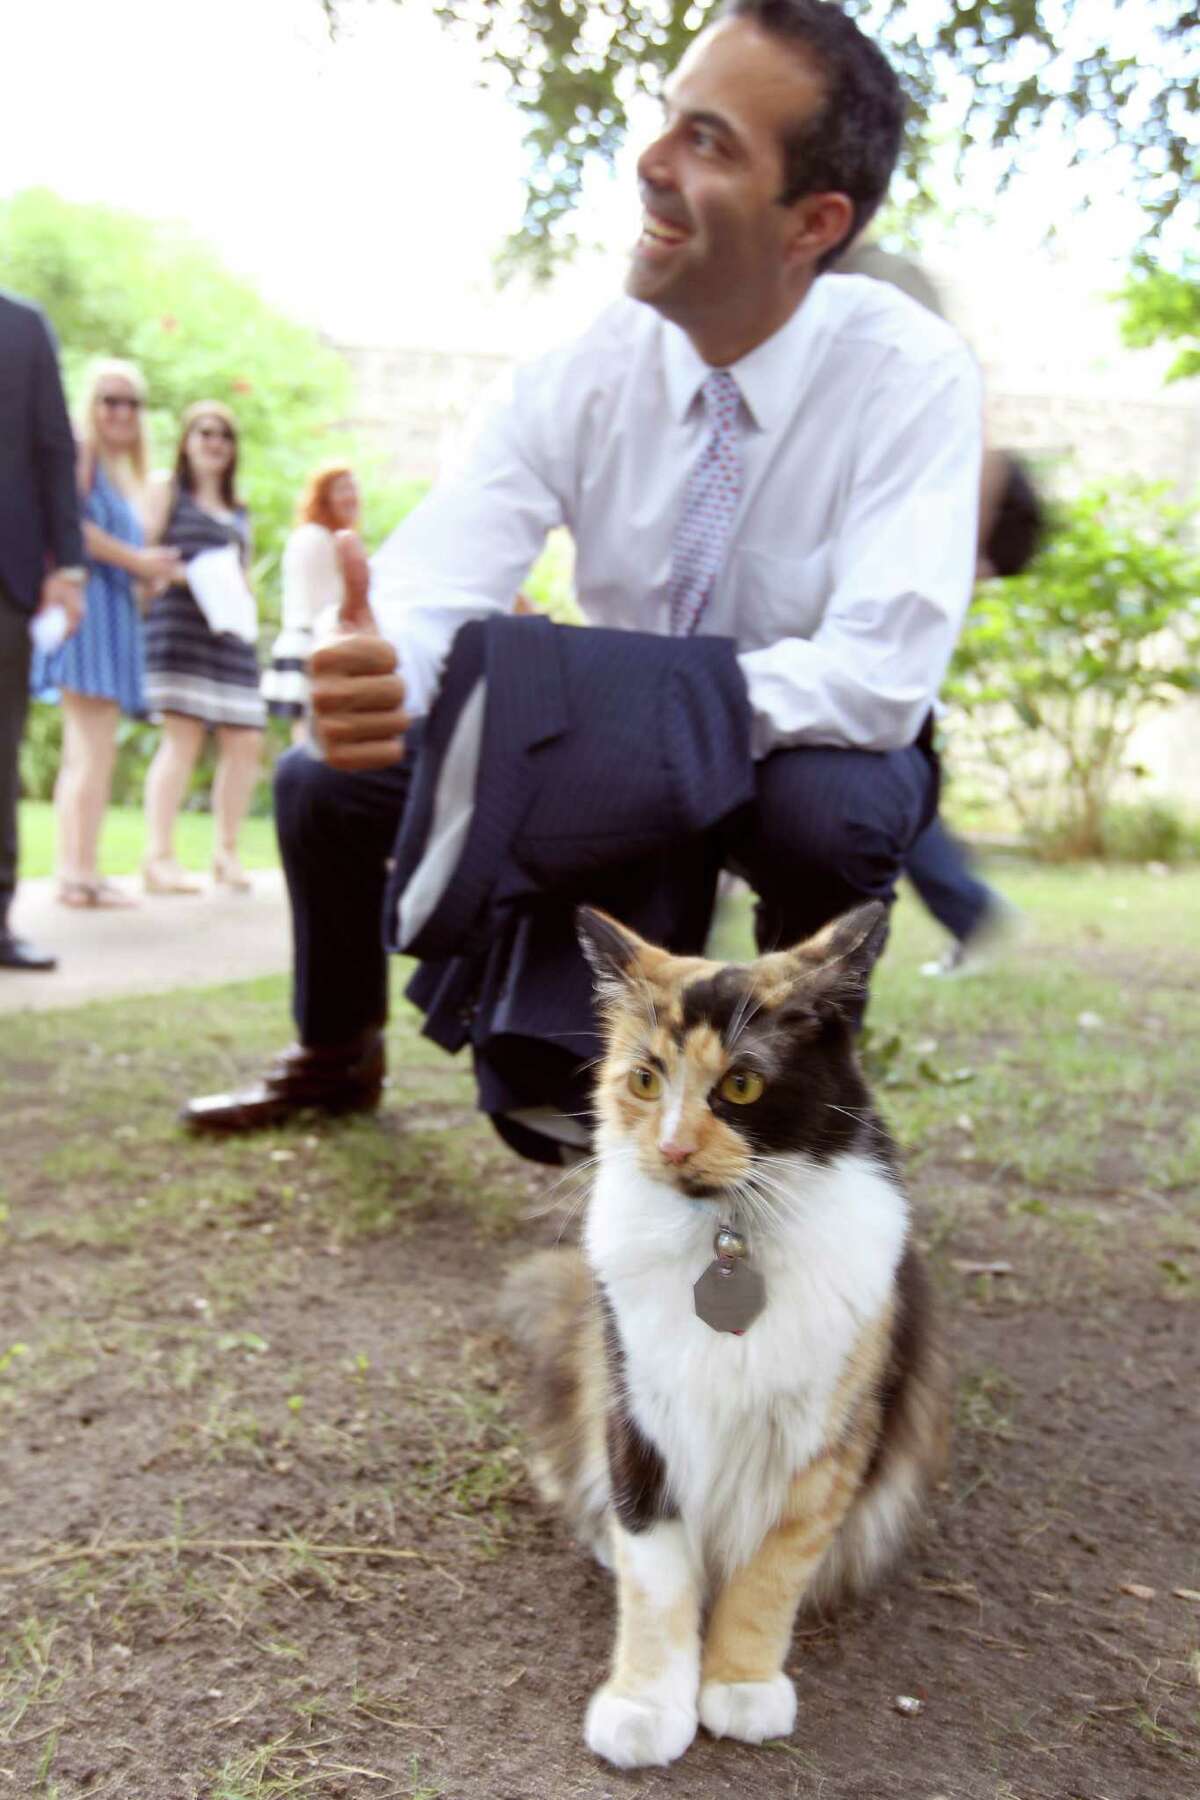 Texas Land Commissioner George P. Bush poses Wednesday Sept. 2, 2015 with Bella the Alamo Cat while on a tour of the Alamo grounds. Bush was in San Anotnio to celebrate the $31.5 million the General Land Office received to help preserve and develop the Alamo.